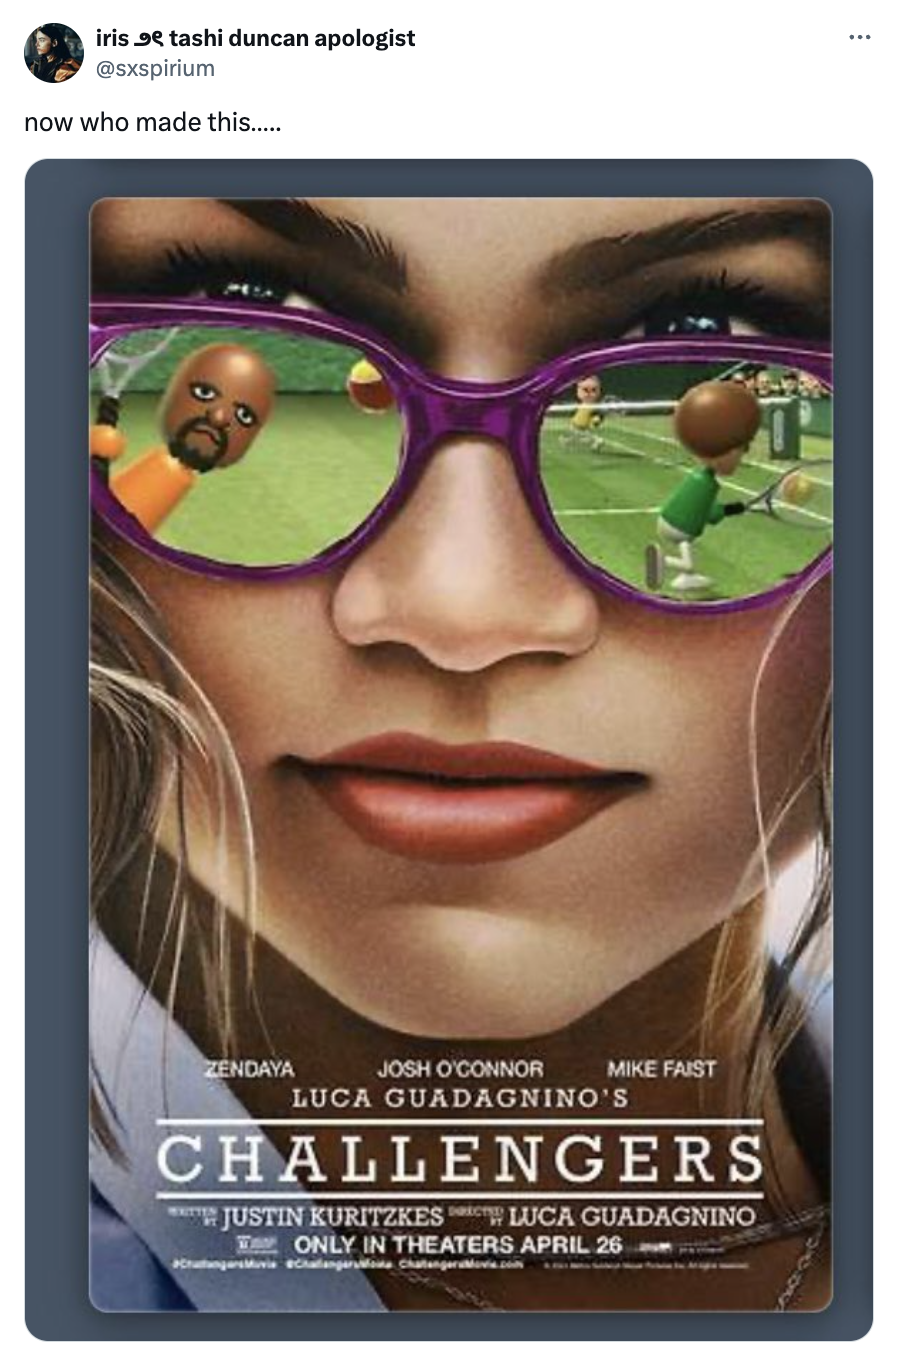 Movie poster for "Challengers" featuring close-up of Zendaya in sunglasses reflecting a tennis court. Text: actors' names, title, release date